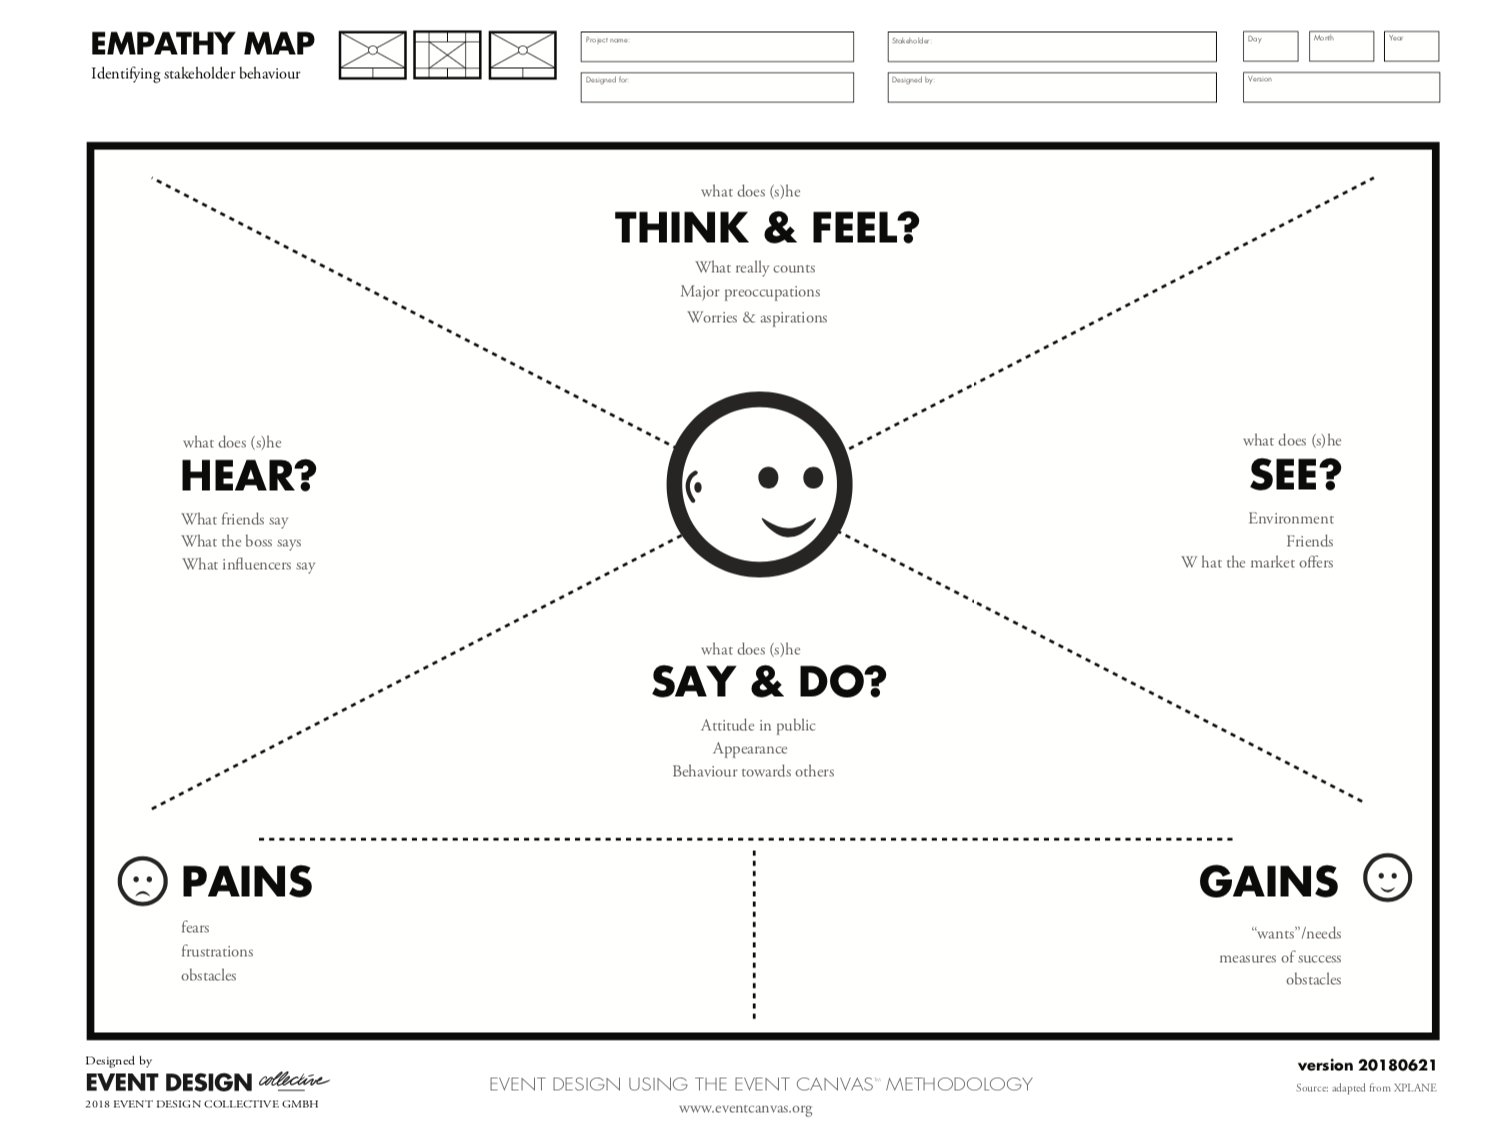 What did you hear me say. Эмпатия схема. Empathy d.o карты. Empathy Map Template. Empathy Map example.